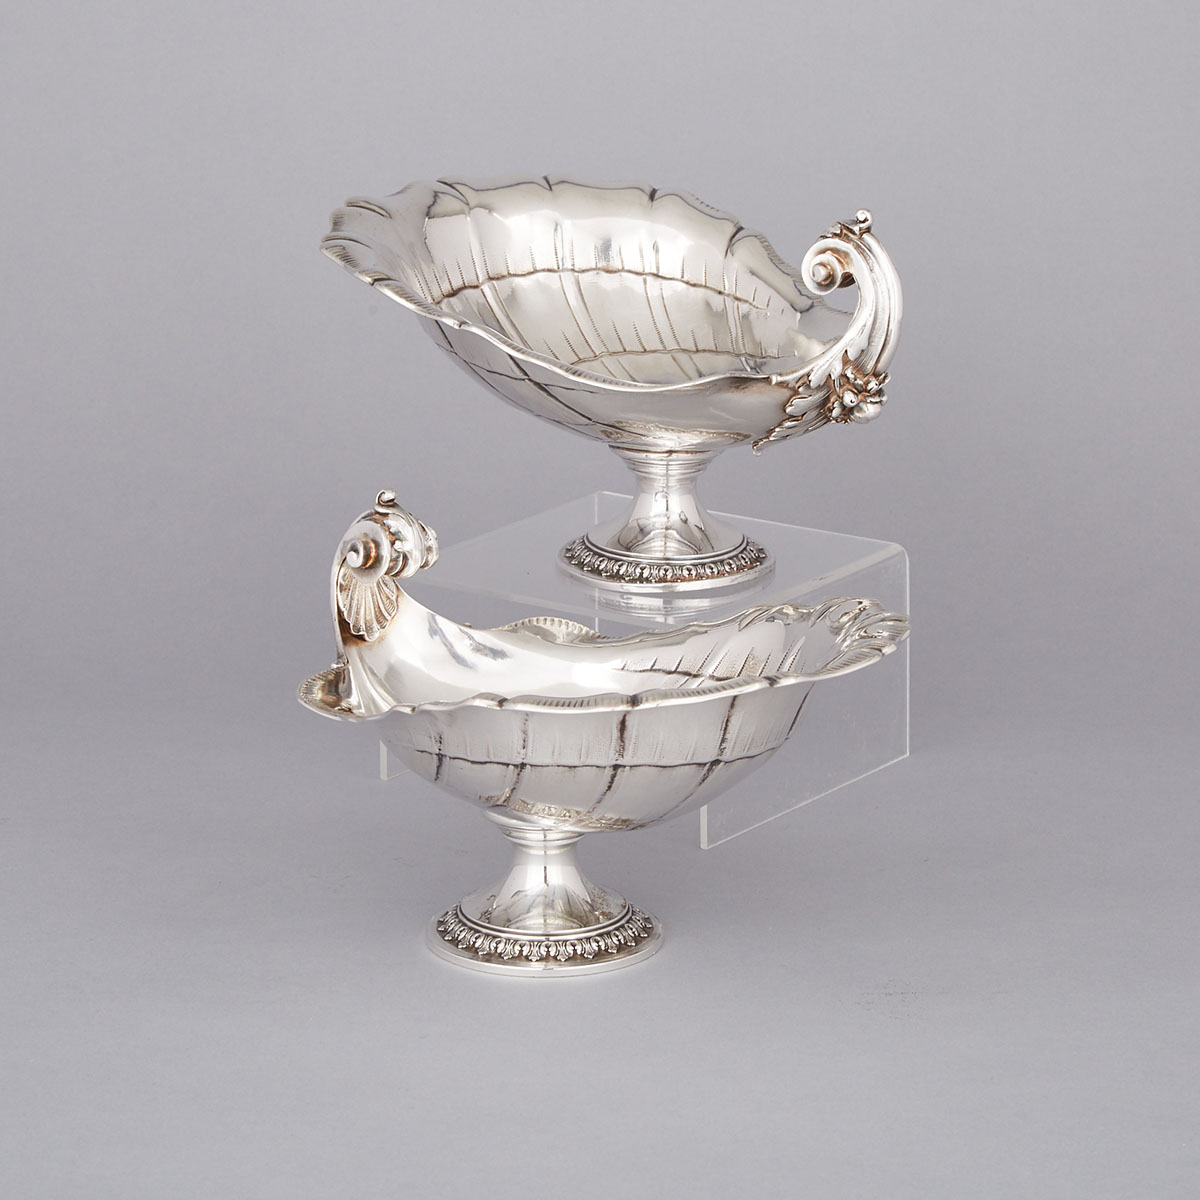 Pair of Continental Silver Shell Form Sweetmeat Dishes, early 20th century